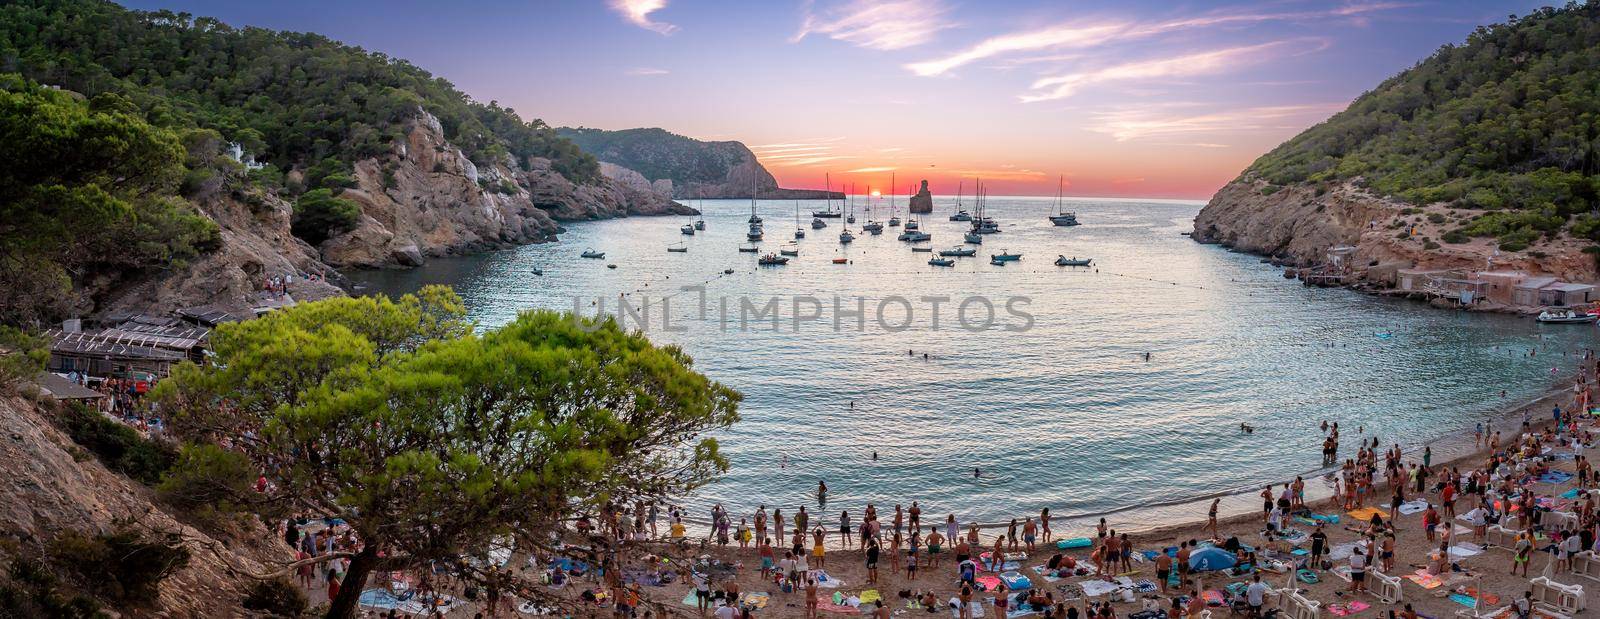 Panoramic view of a sunset in Cala Benirras by LopezPastor